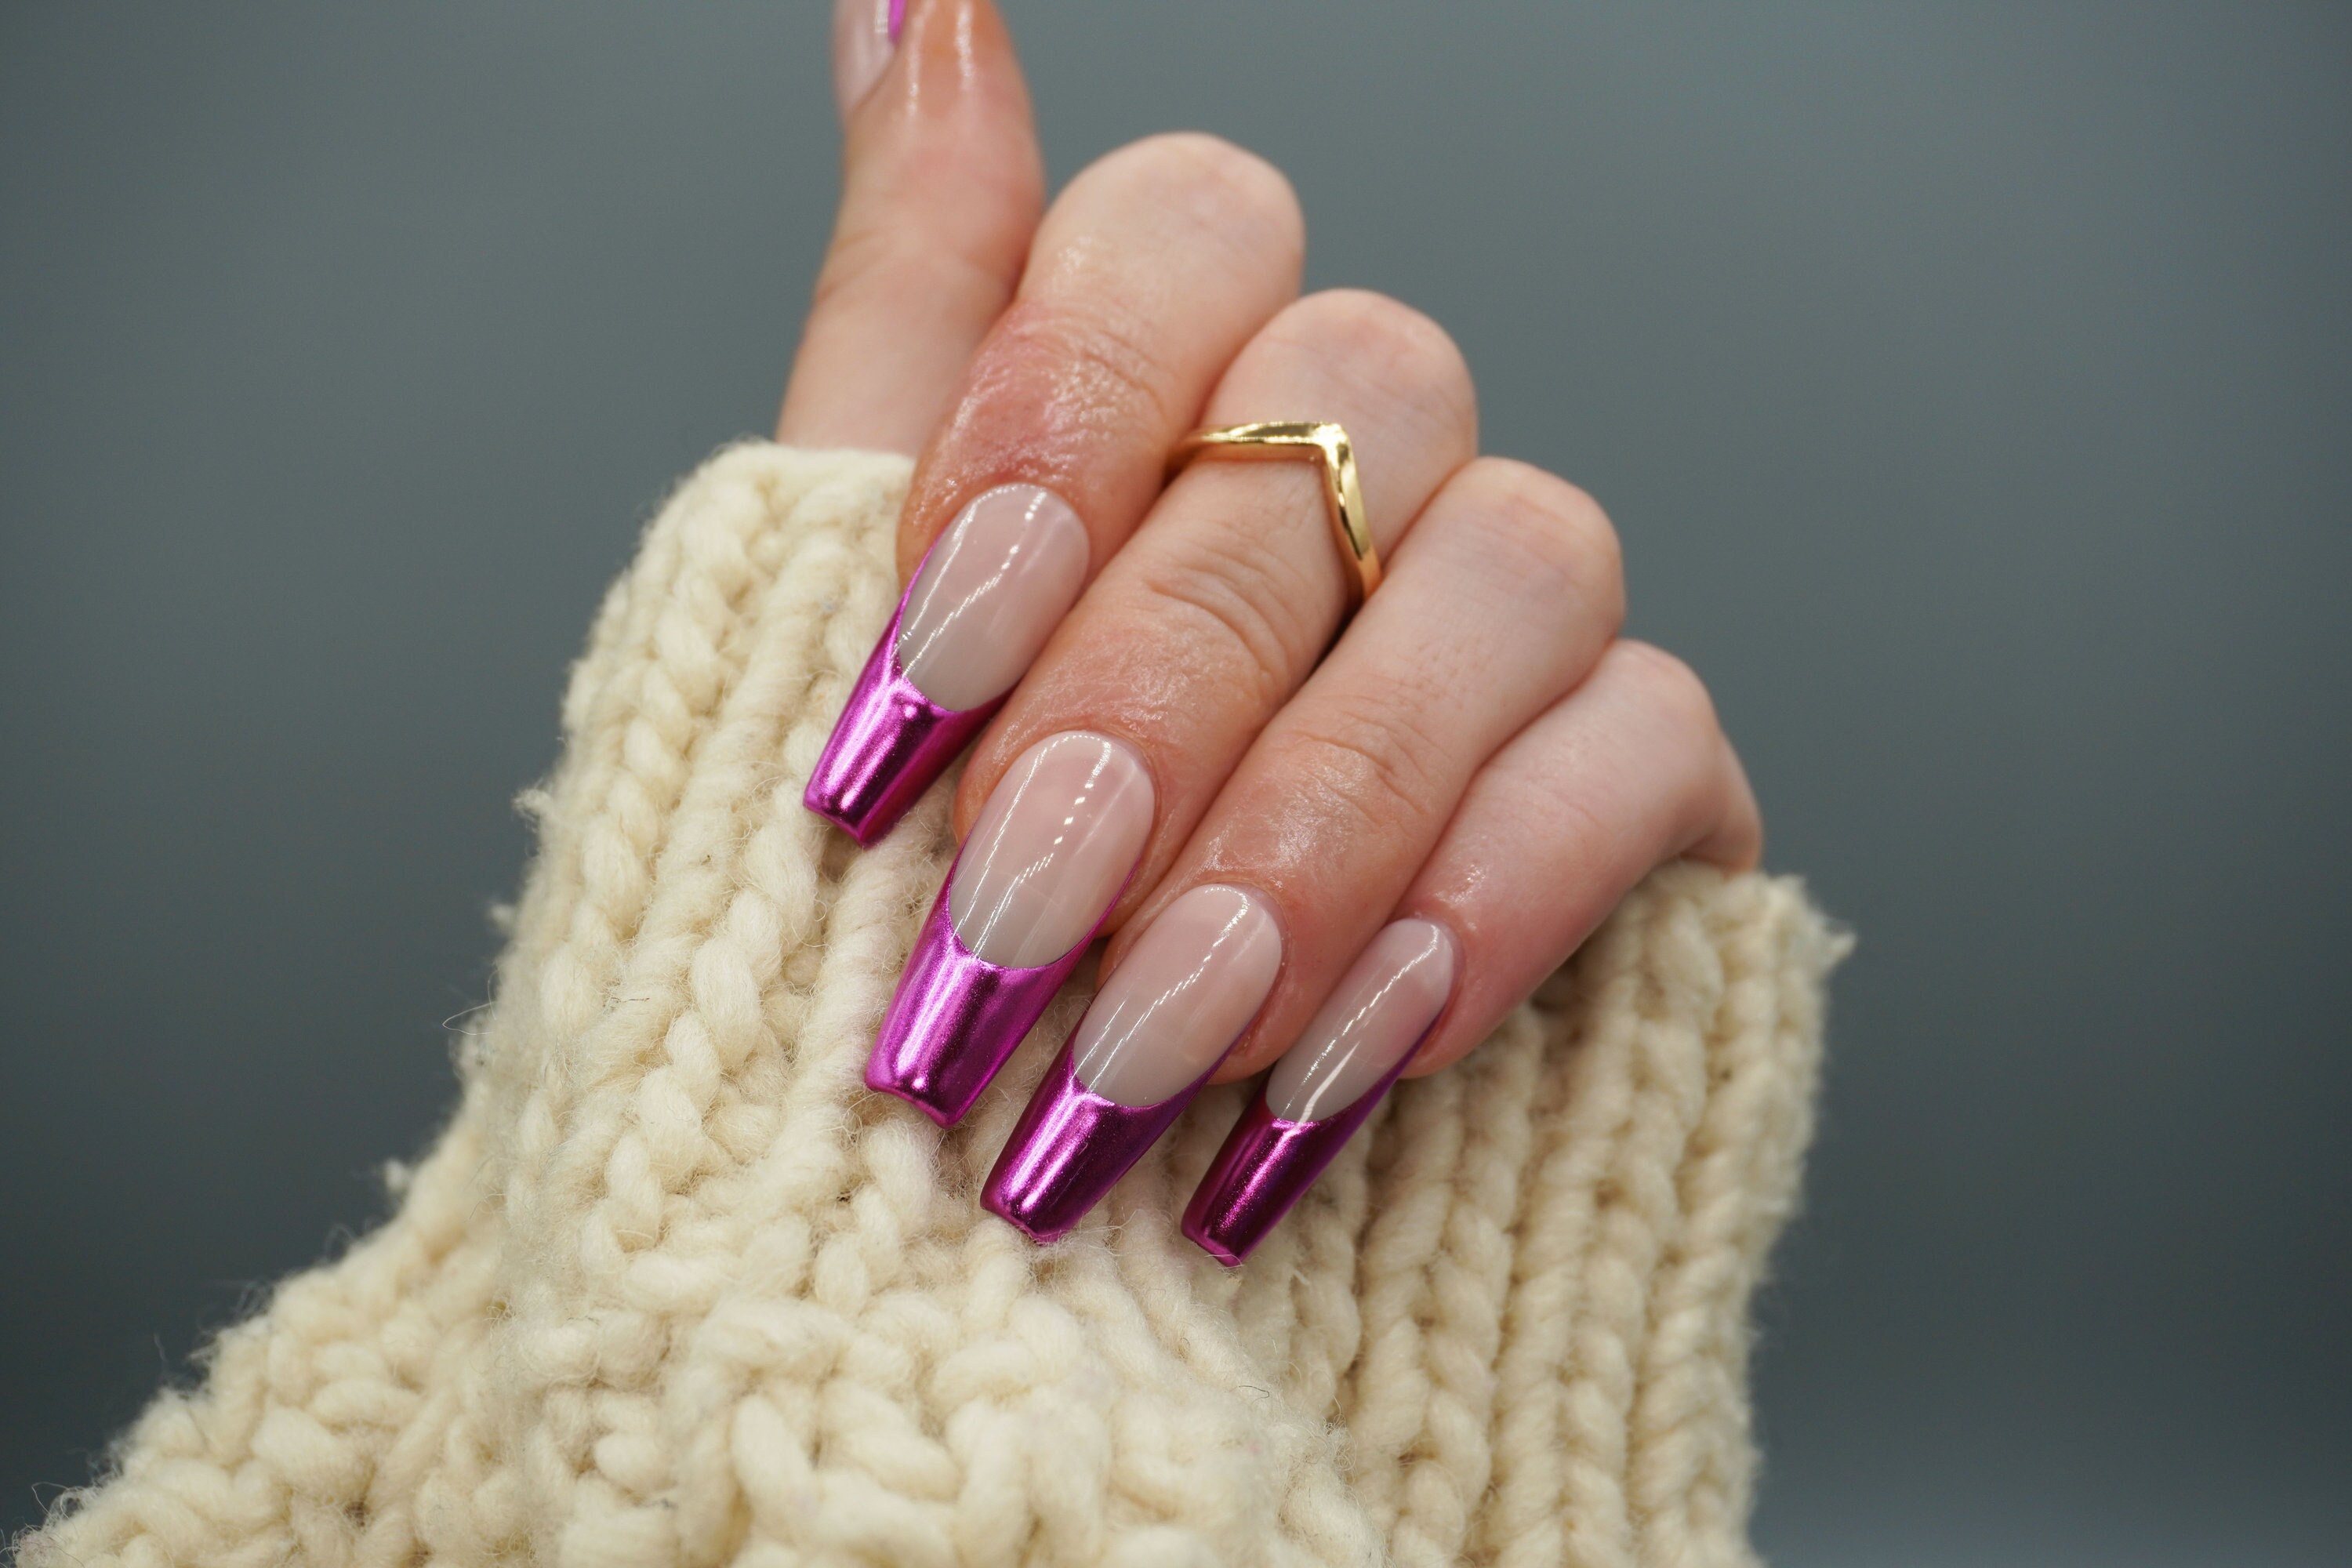 Chrome French Tips Are Having A Major Moment Right Now - HELLO! India